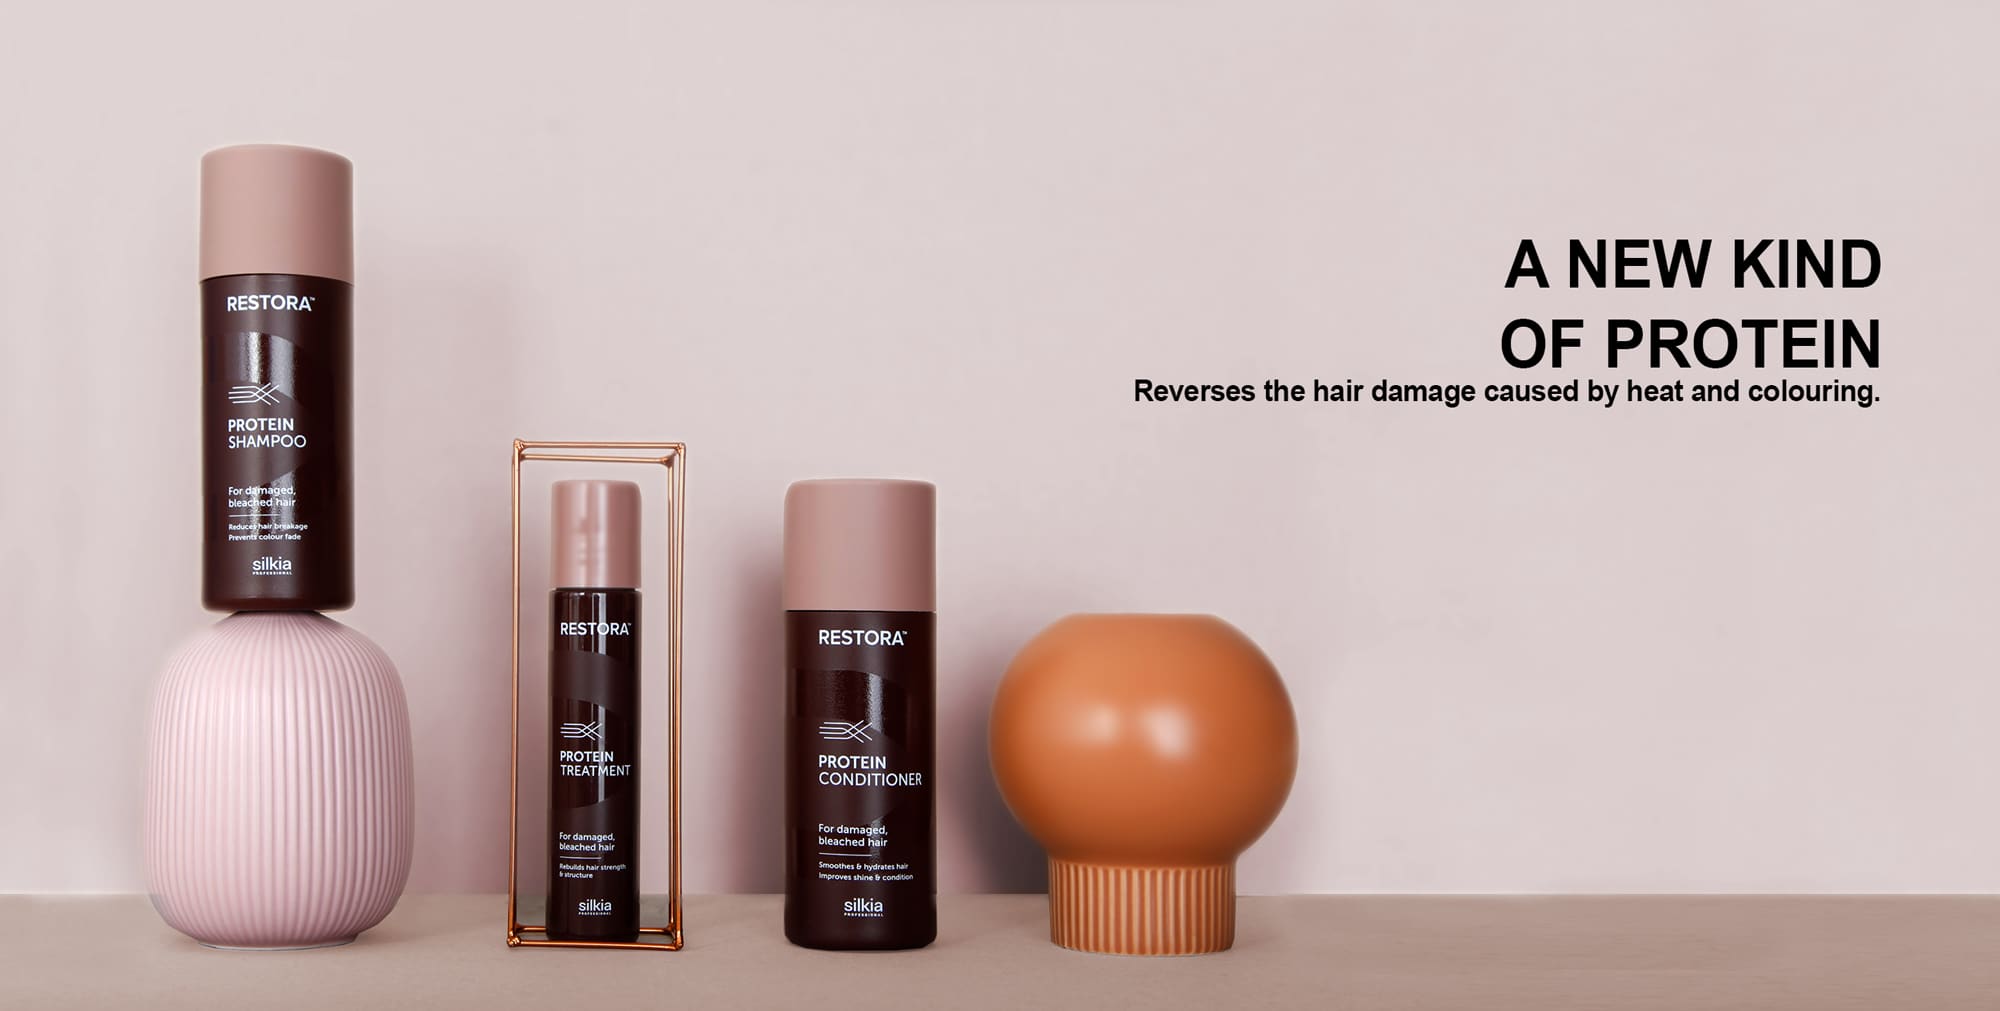 Restora Protein Shampoo, Restora Protein Treatment and Restora Protein Conditioner are shown with props. They reverse the hair damage caused by heat and colouring.